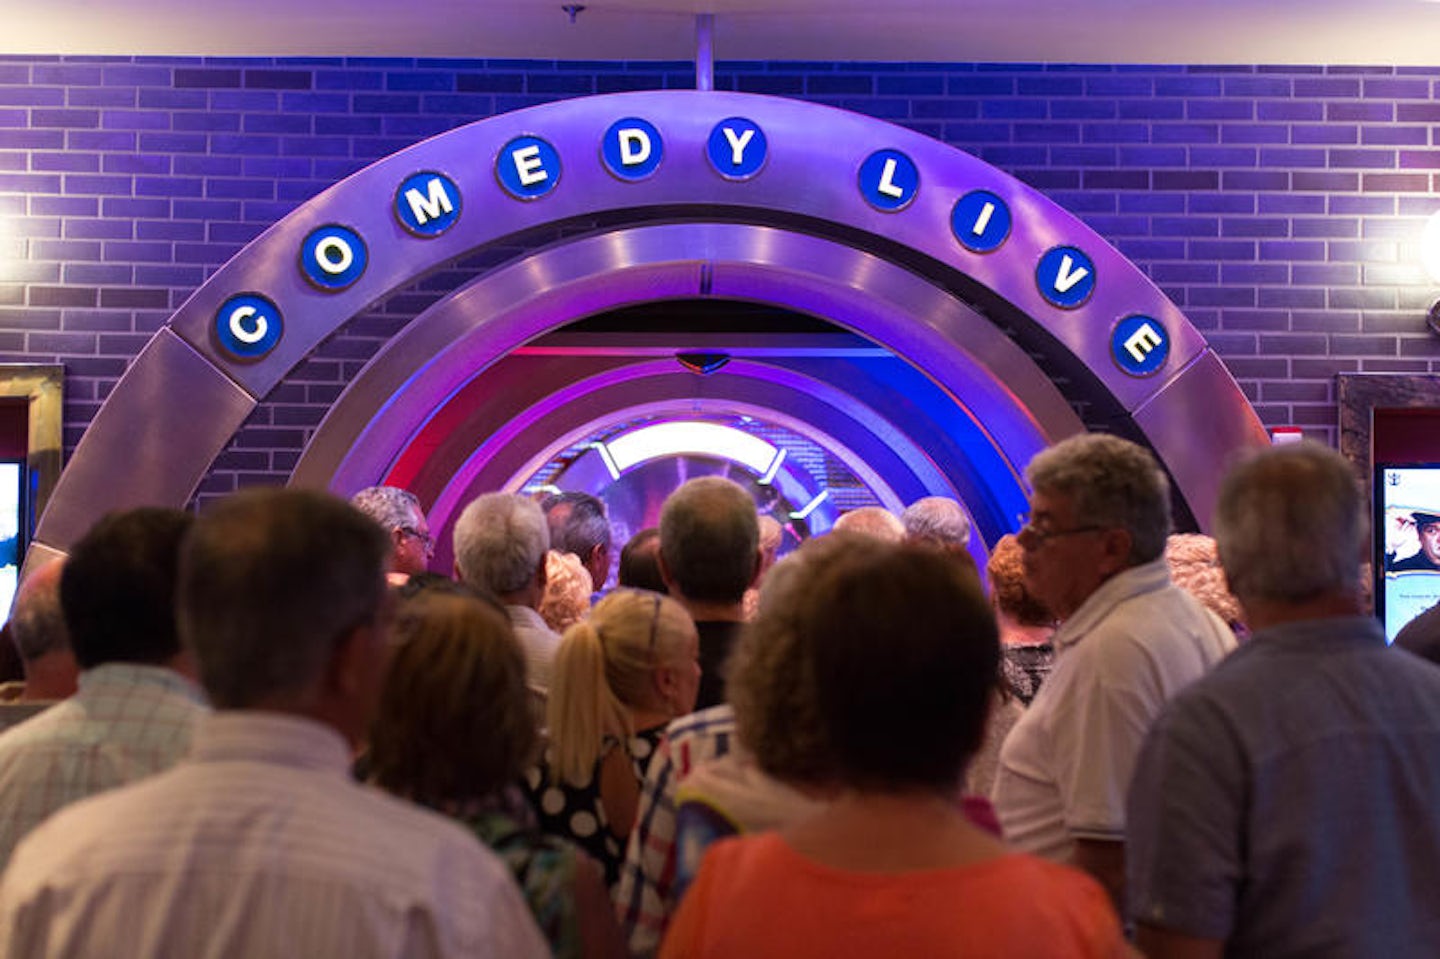 Comedy Live on Allure of the Seas